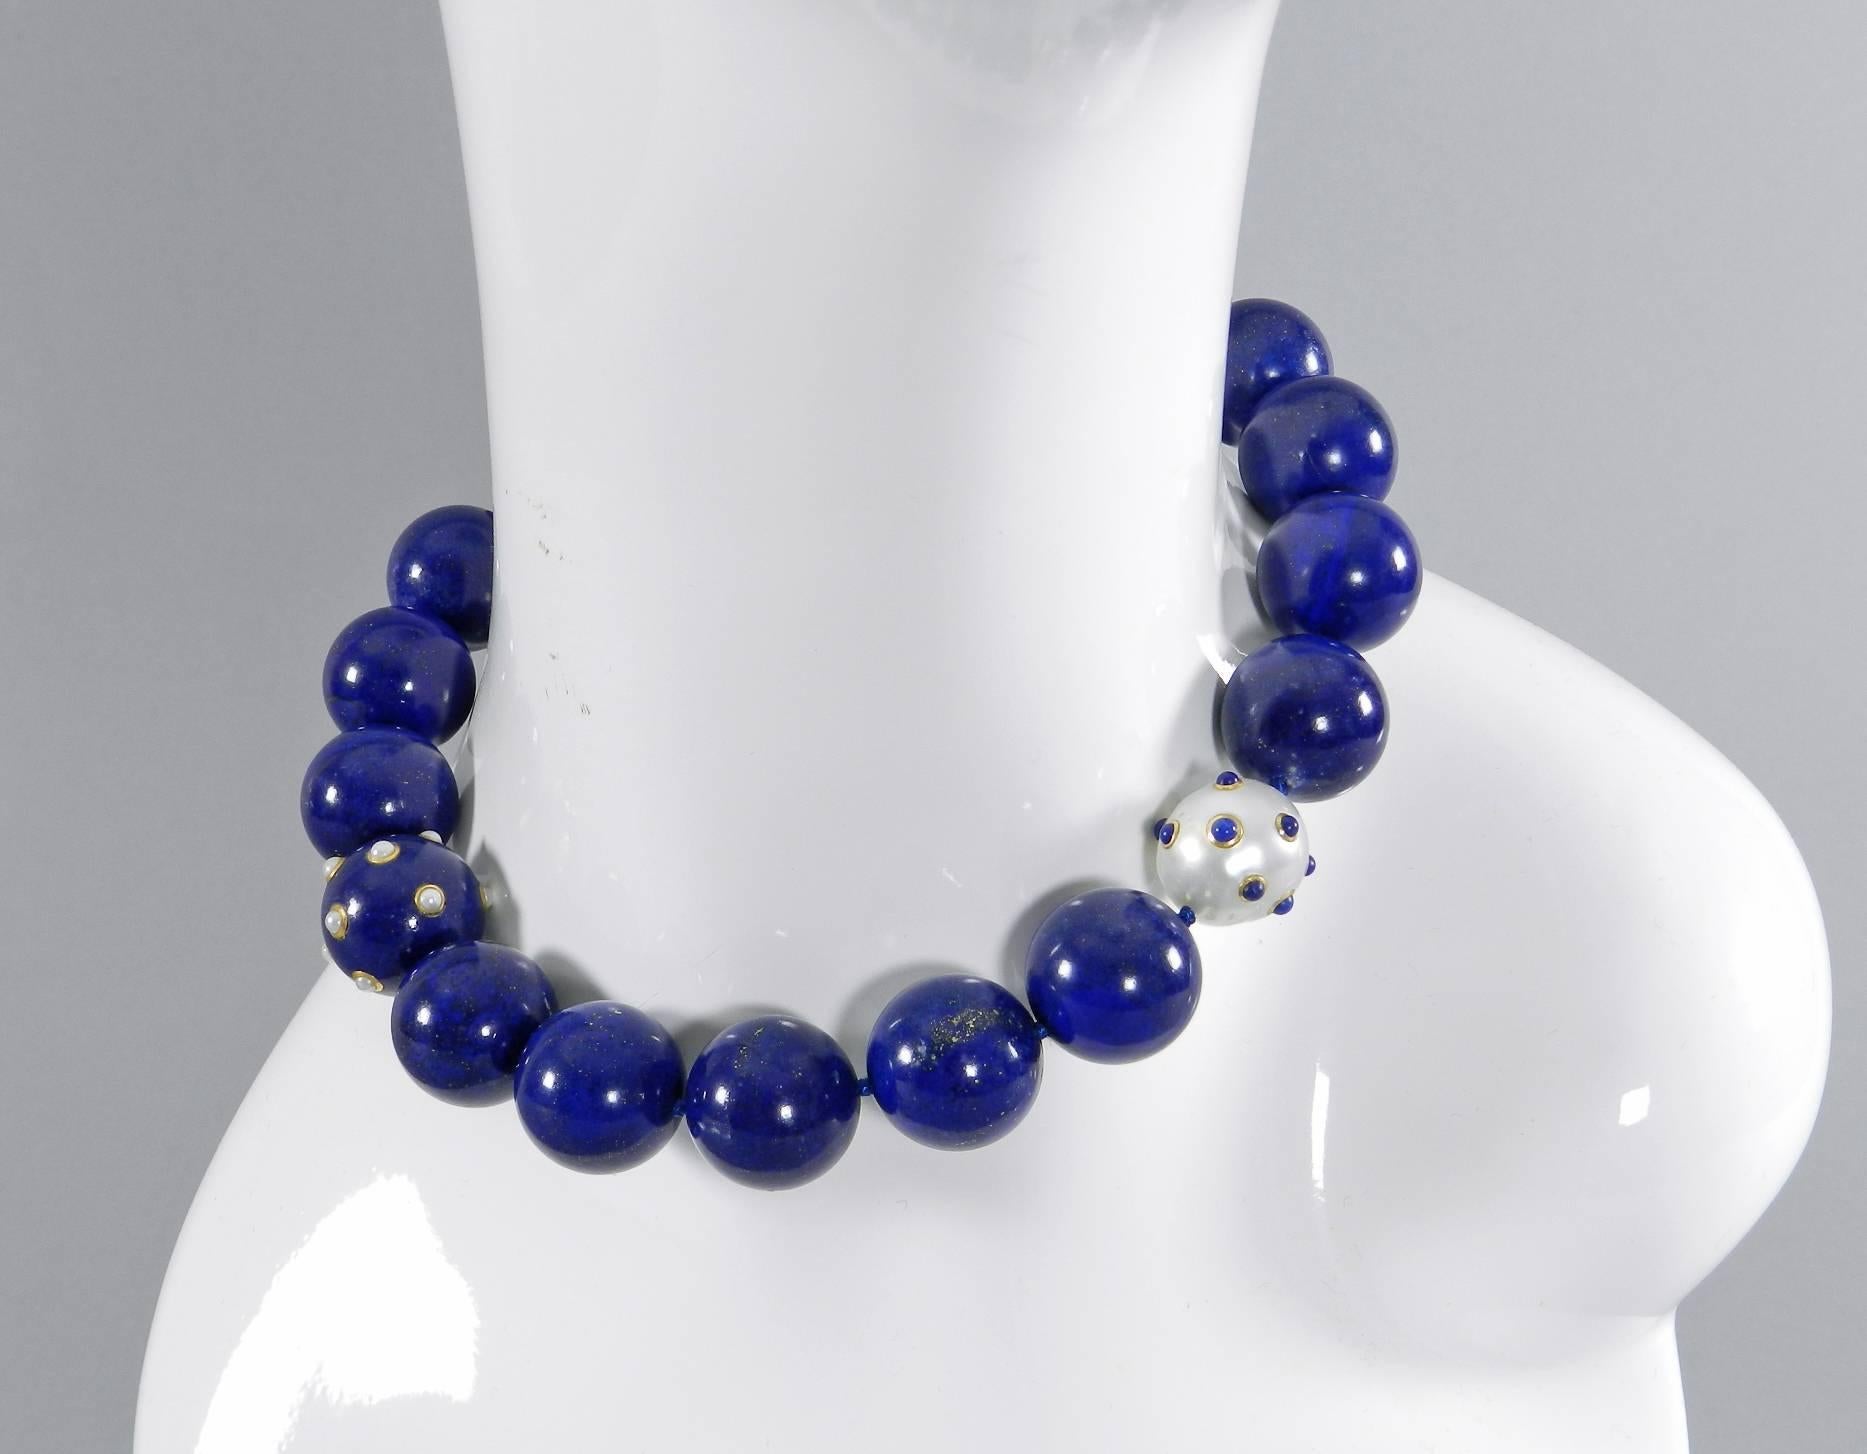 Angela Cummings lapis lazuli and pearl beaded choker necklace. Unsigned but original owner had this custom made by Angela Cummings and was a major client. Circa 2001. 18 lapis beads measuring 19mm including one inlaid with pearl and 18k gold.  1